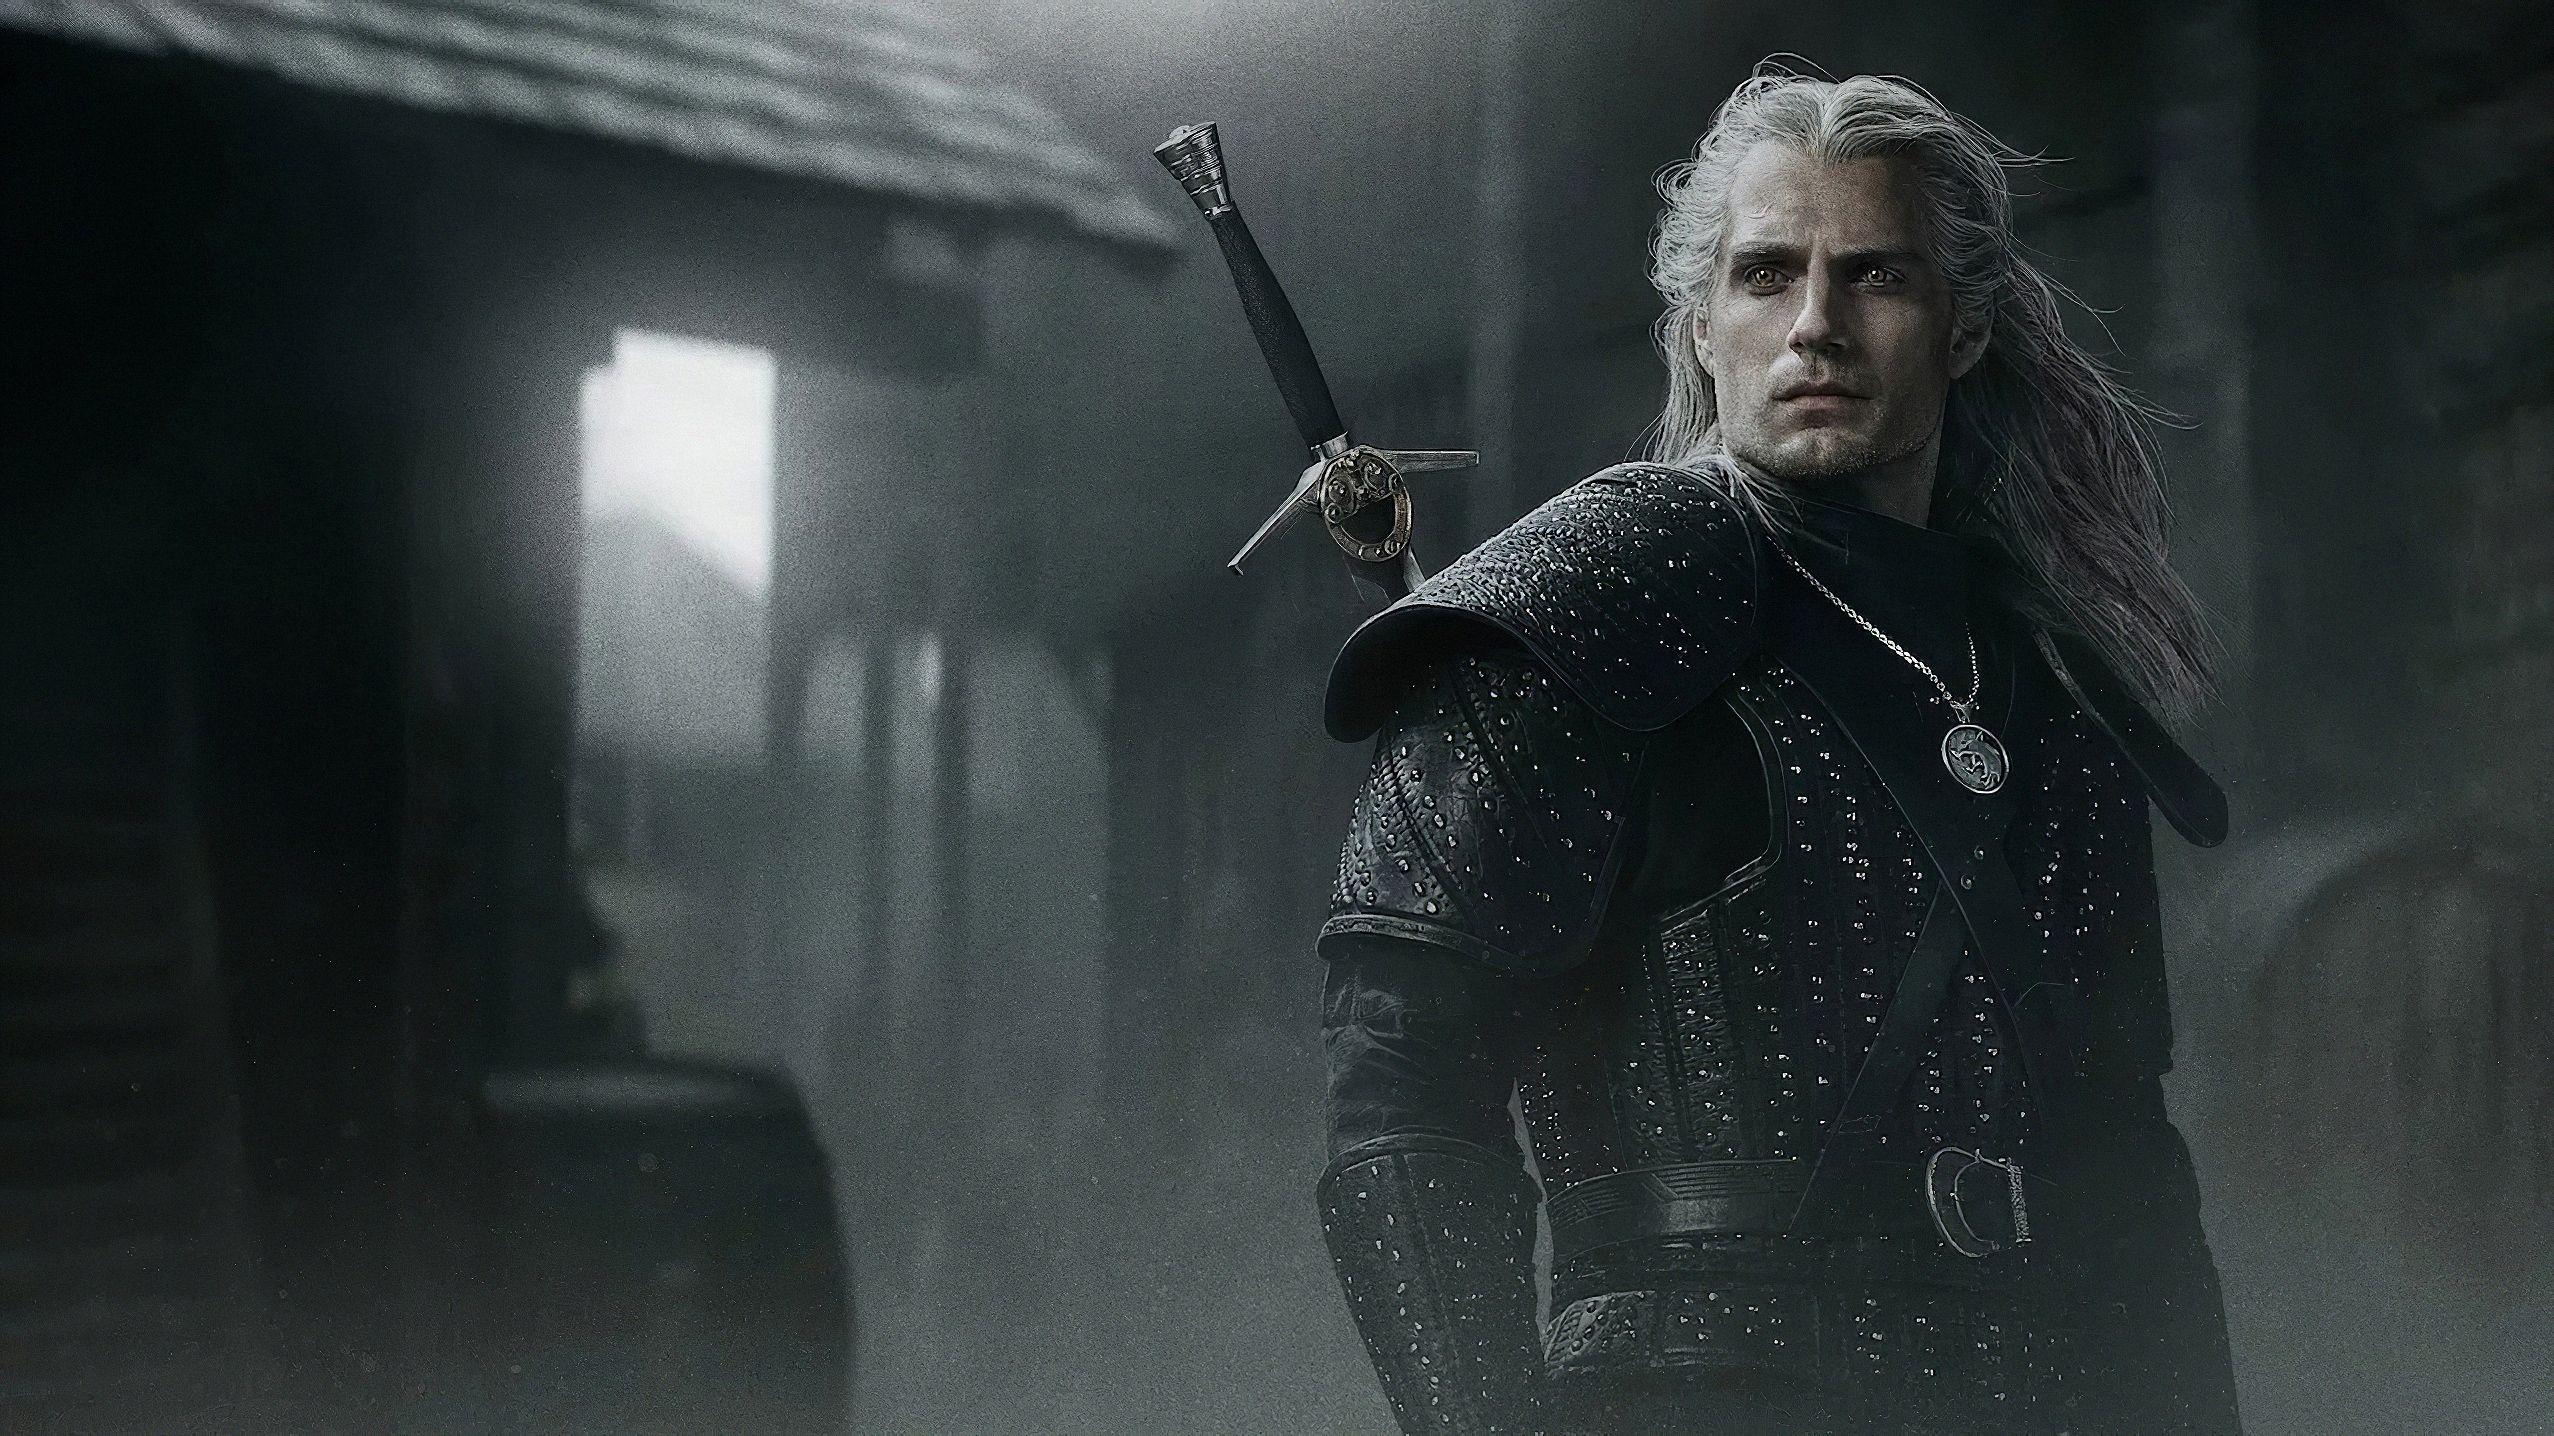 The Witcher Henry Cavill HD Tv Shows, 4k Wallpaper, Image